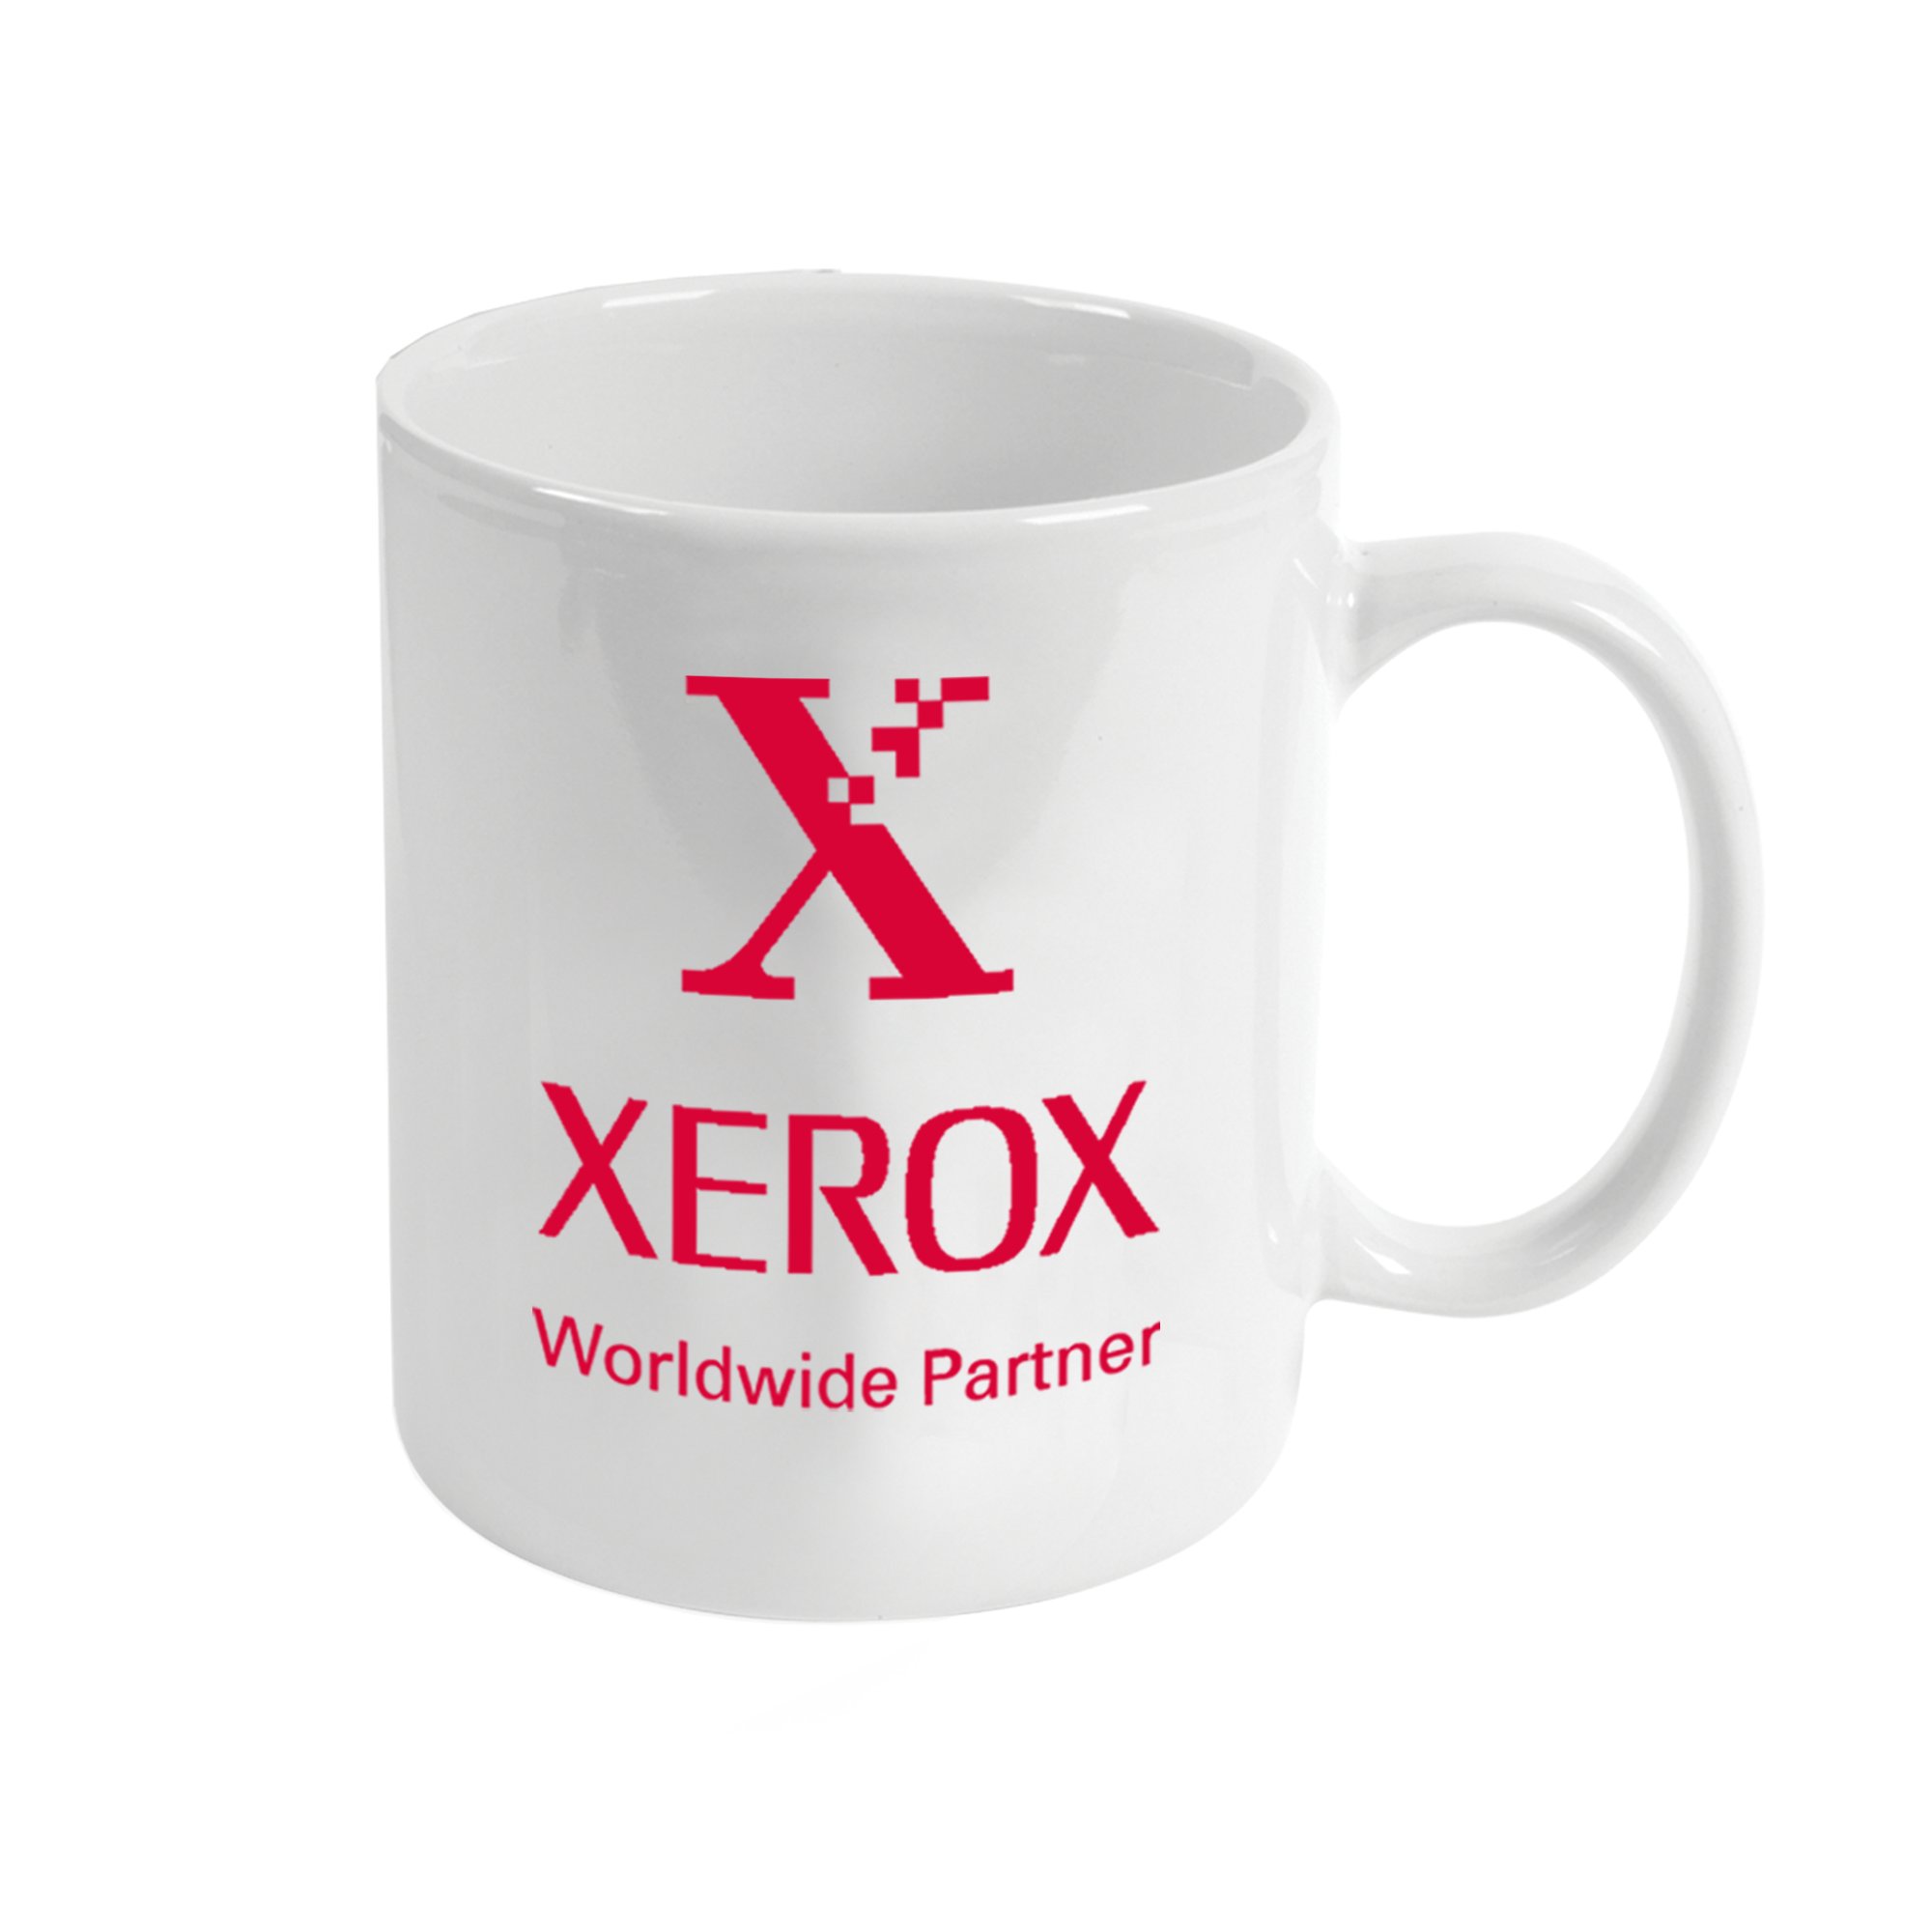 Glistening white promotional mugs are a perfect billboard for your customized ad message. With six lines of imprint your Company's name will always be on display. These 11 oz. ceramic mugs are a most welcome gift by all, and with six colour choices your advertising needs will be met!